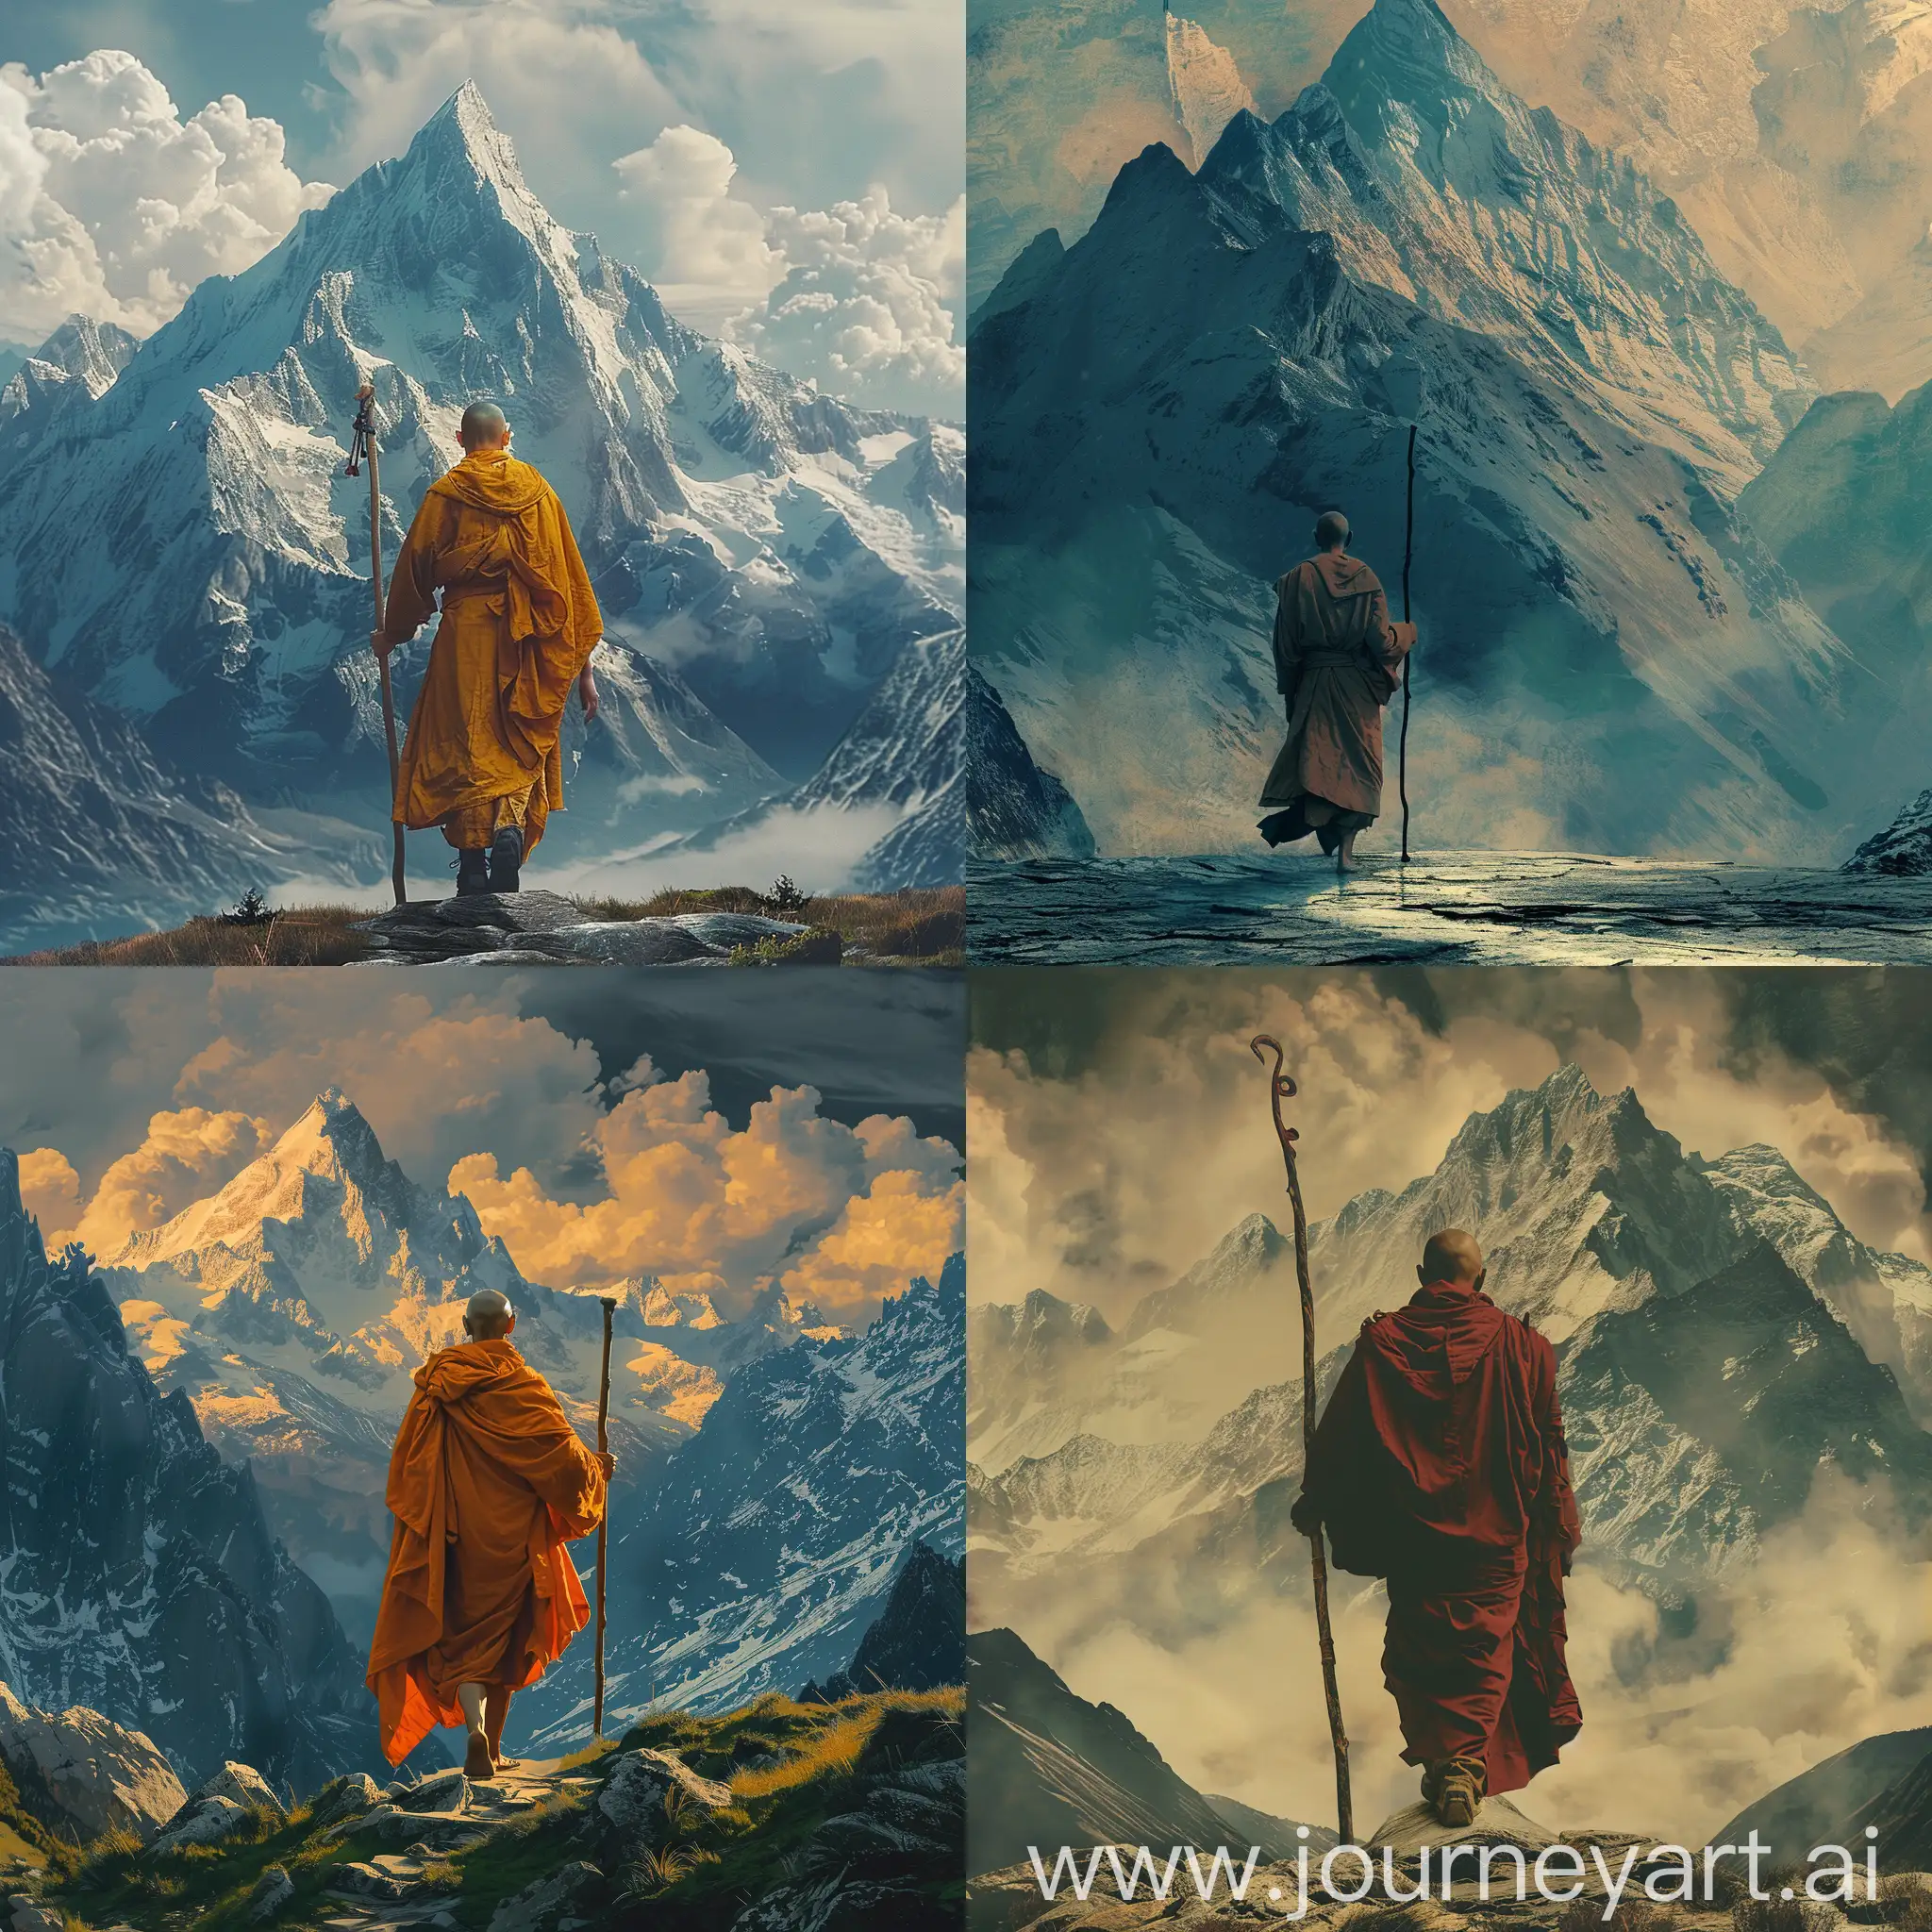 Monk-Traveling-through-Serene-Mountain-Landscape-with-Staff